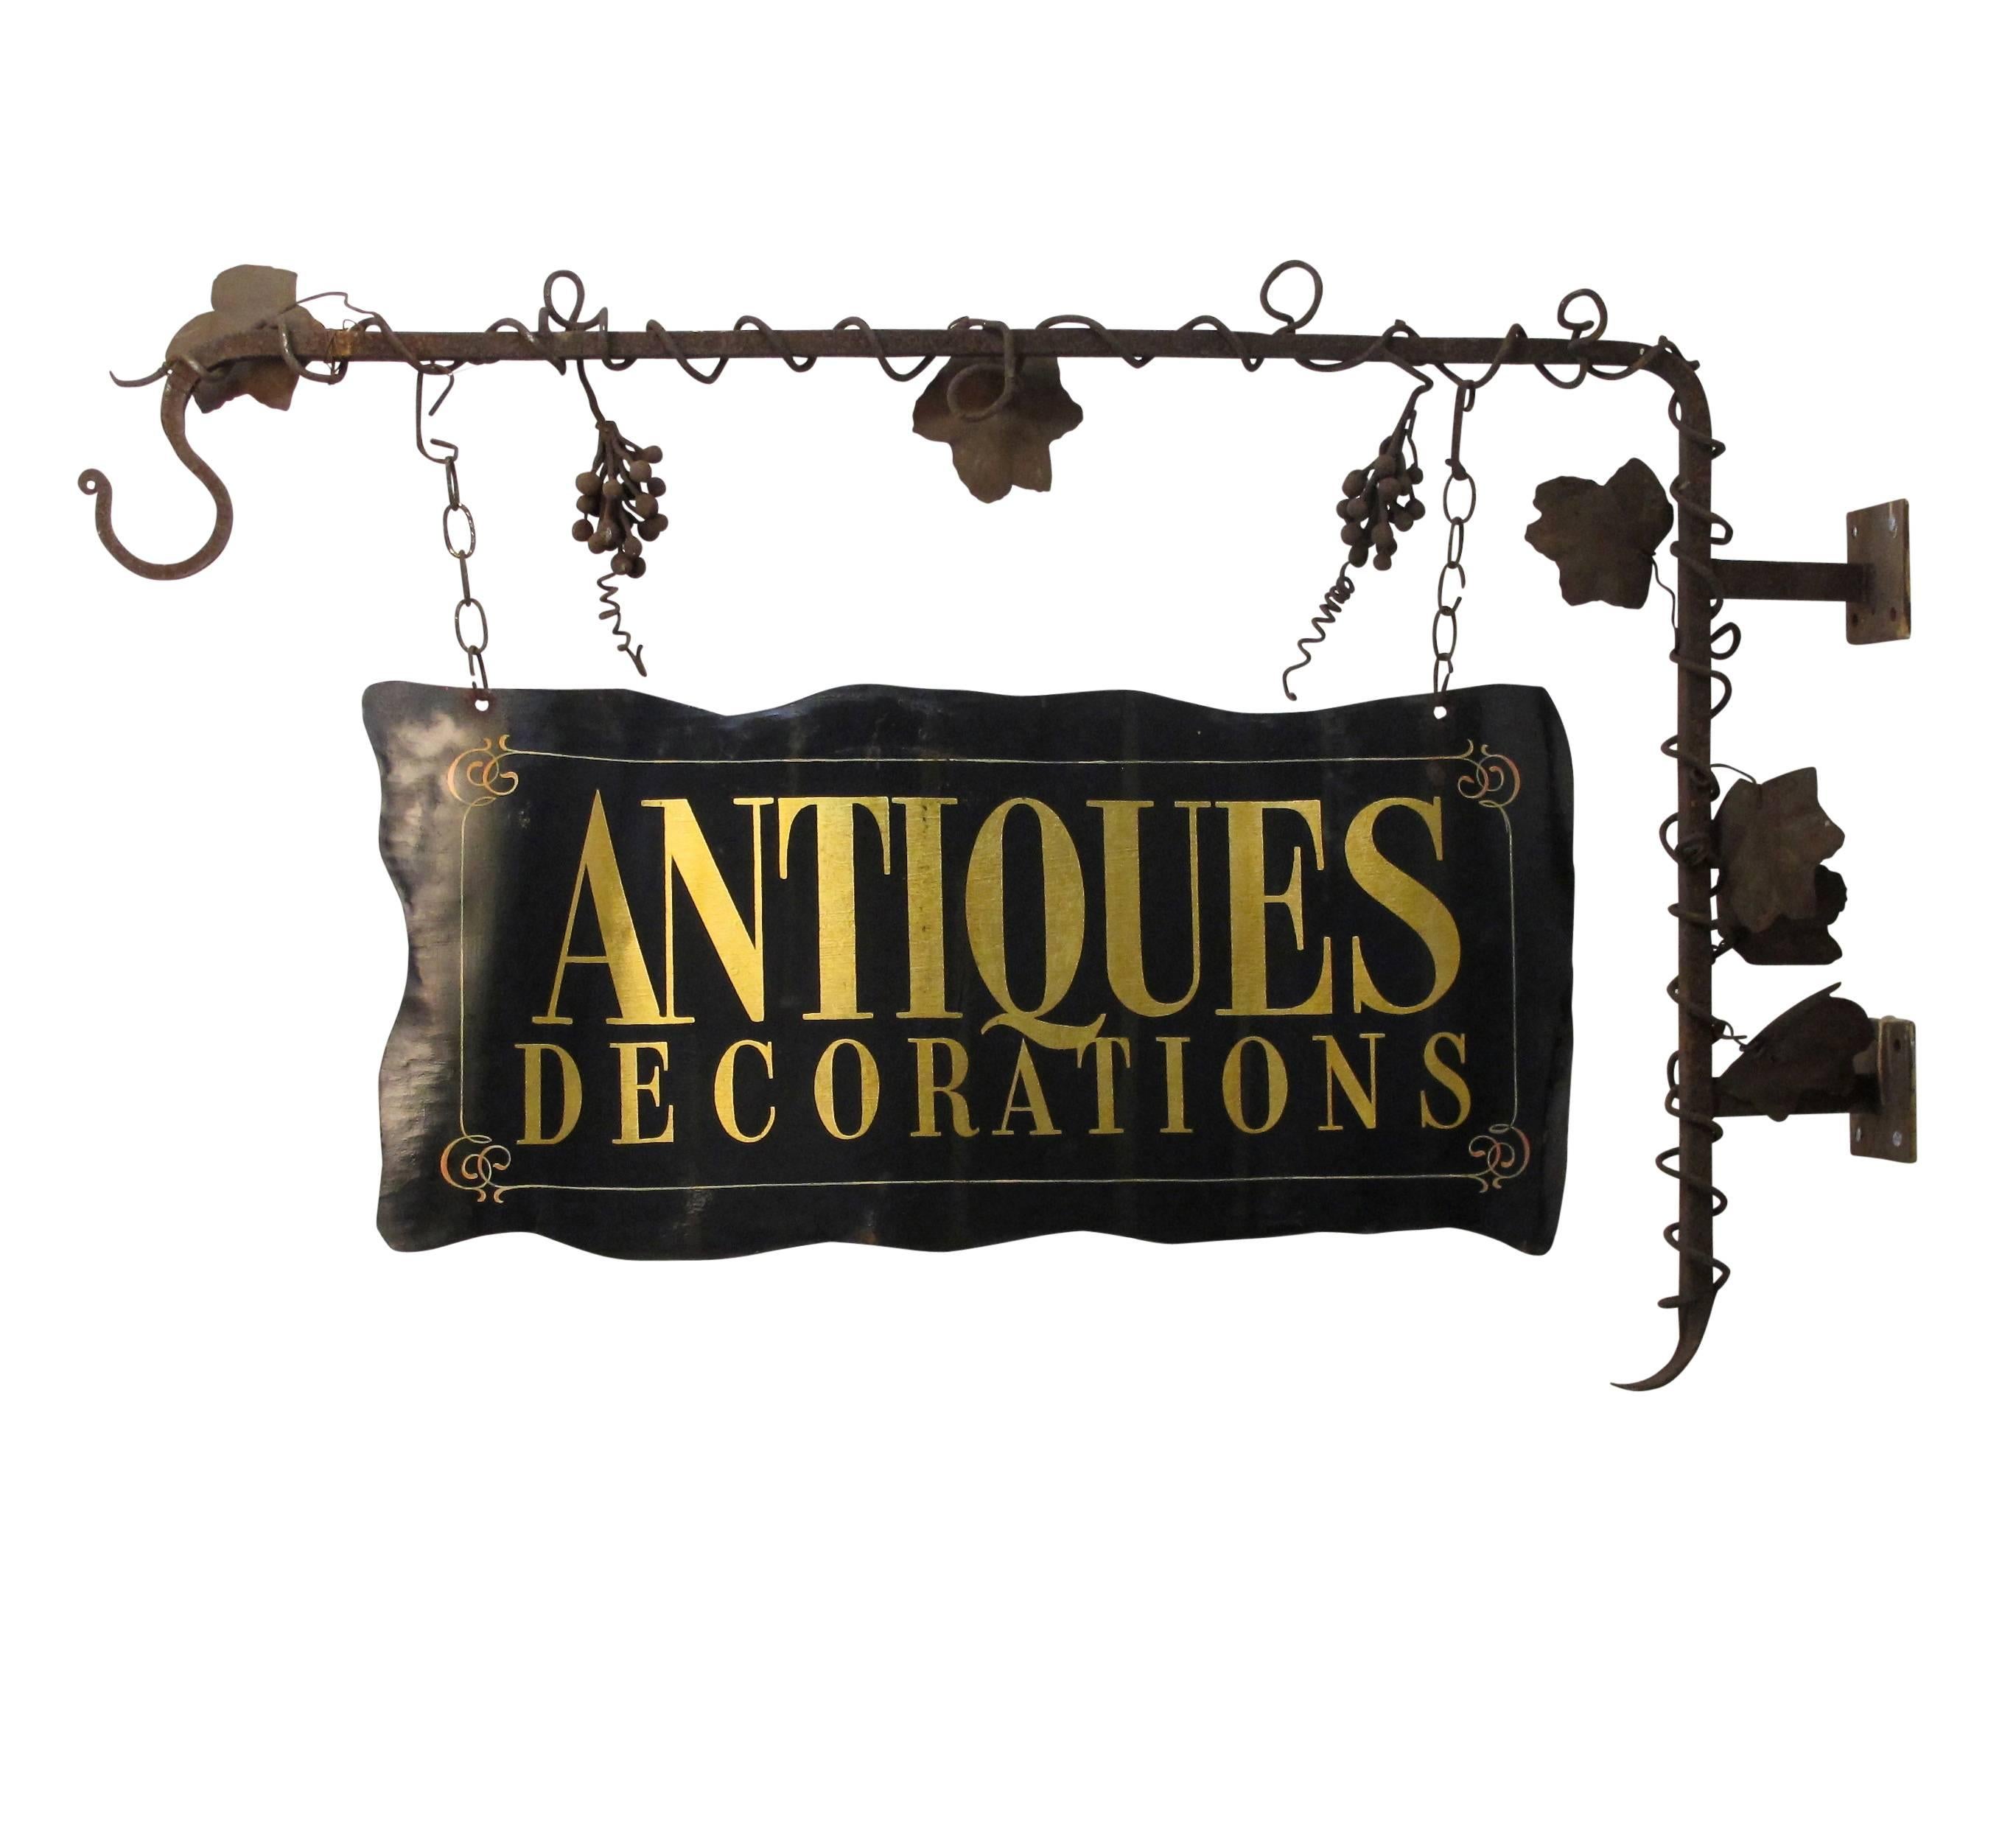 Large tole painted black and gilt ANTIQUES sign (double-sided) hanging from a hand-wrought iron hanger with twisting grape vine detail. Originally a wine store sign converted to an Antique Sign in the mid-20th century.
Measurements for just the